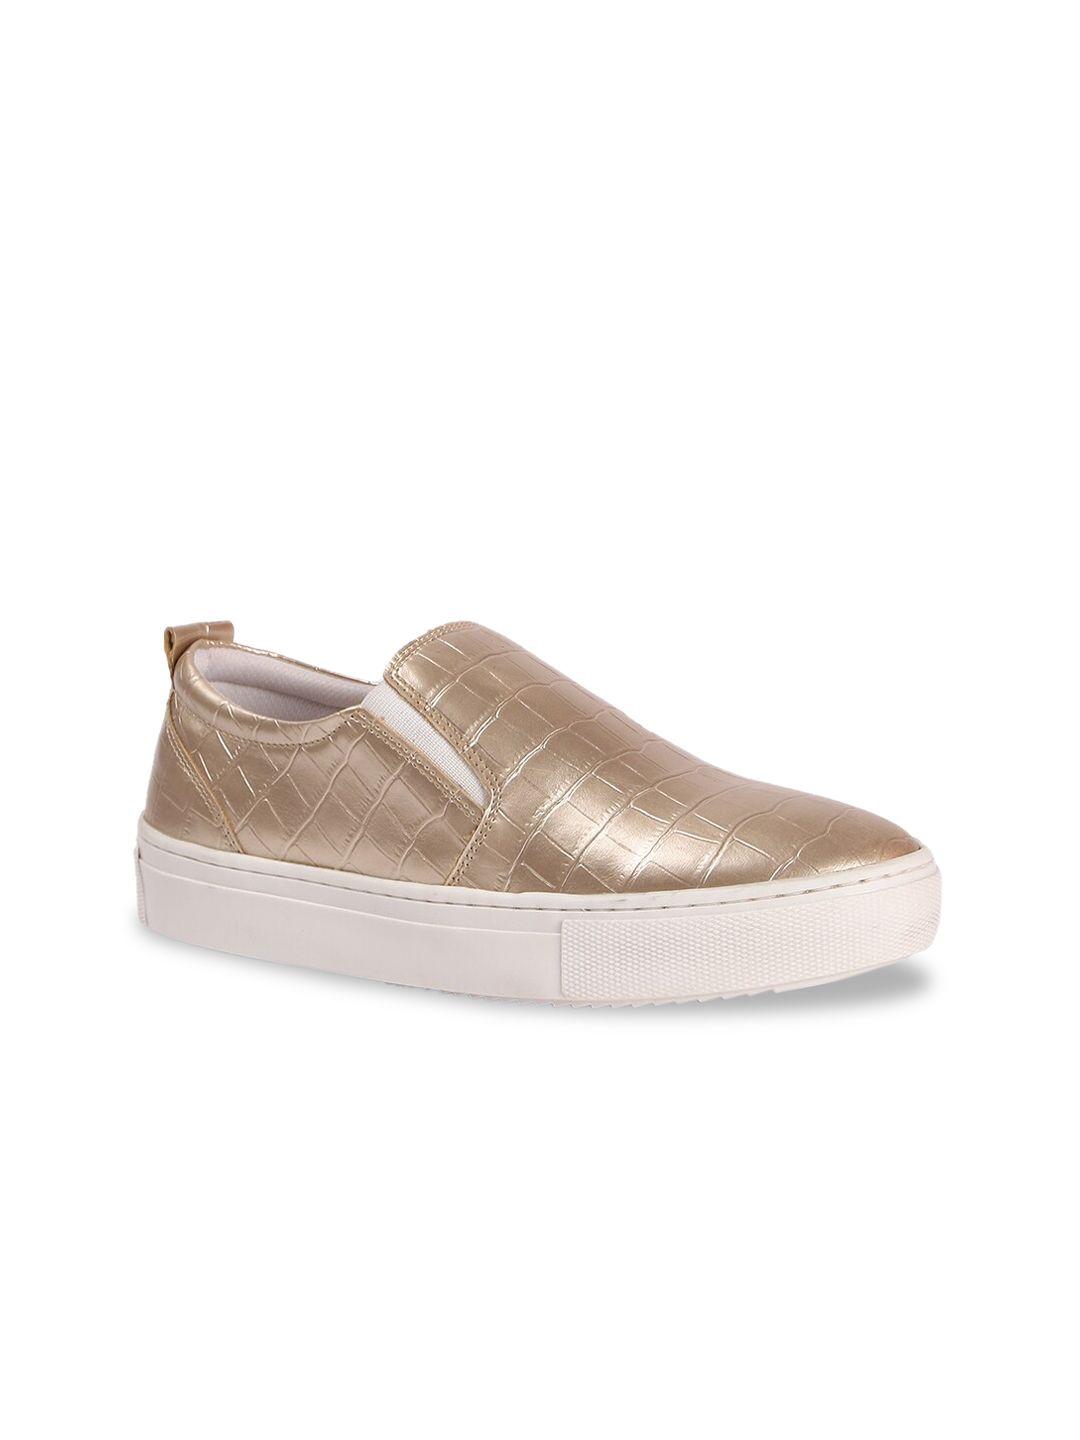 forever 21 women gold-toned textured pu slip-on sneakers